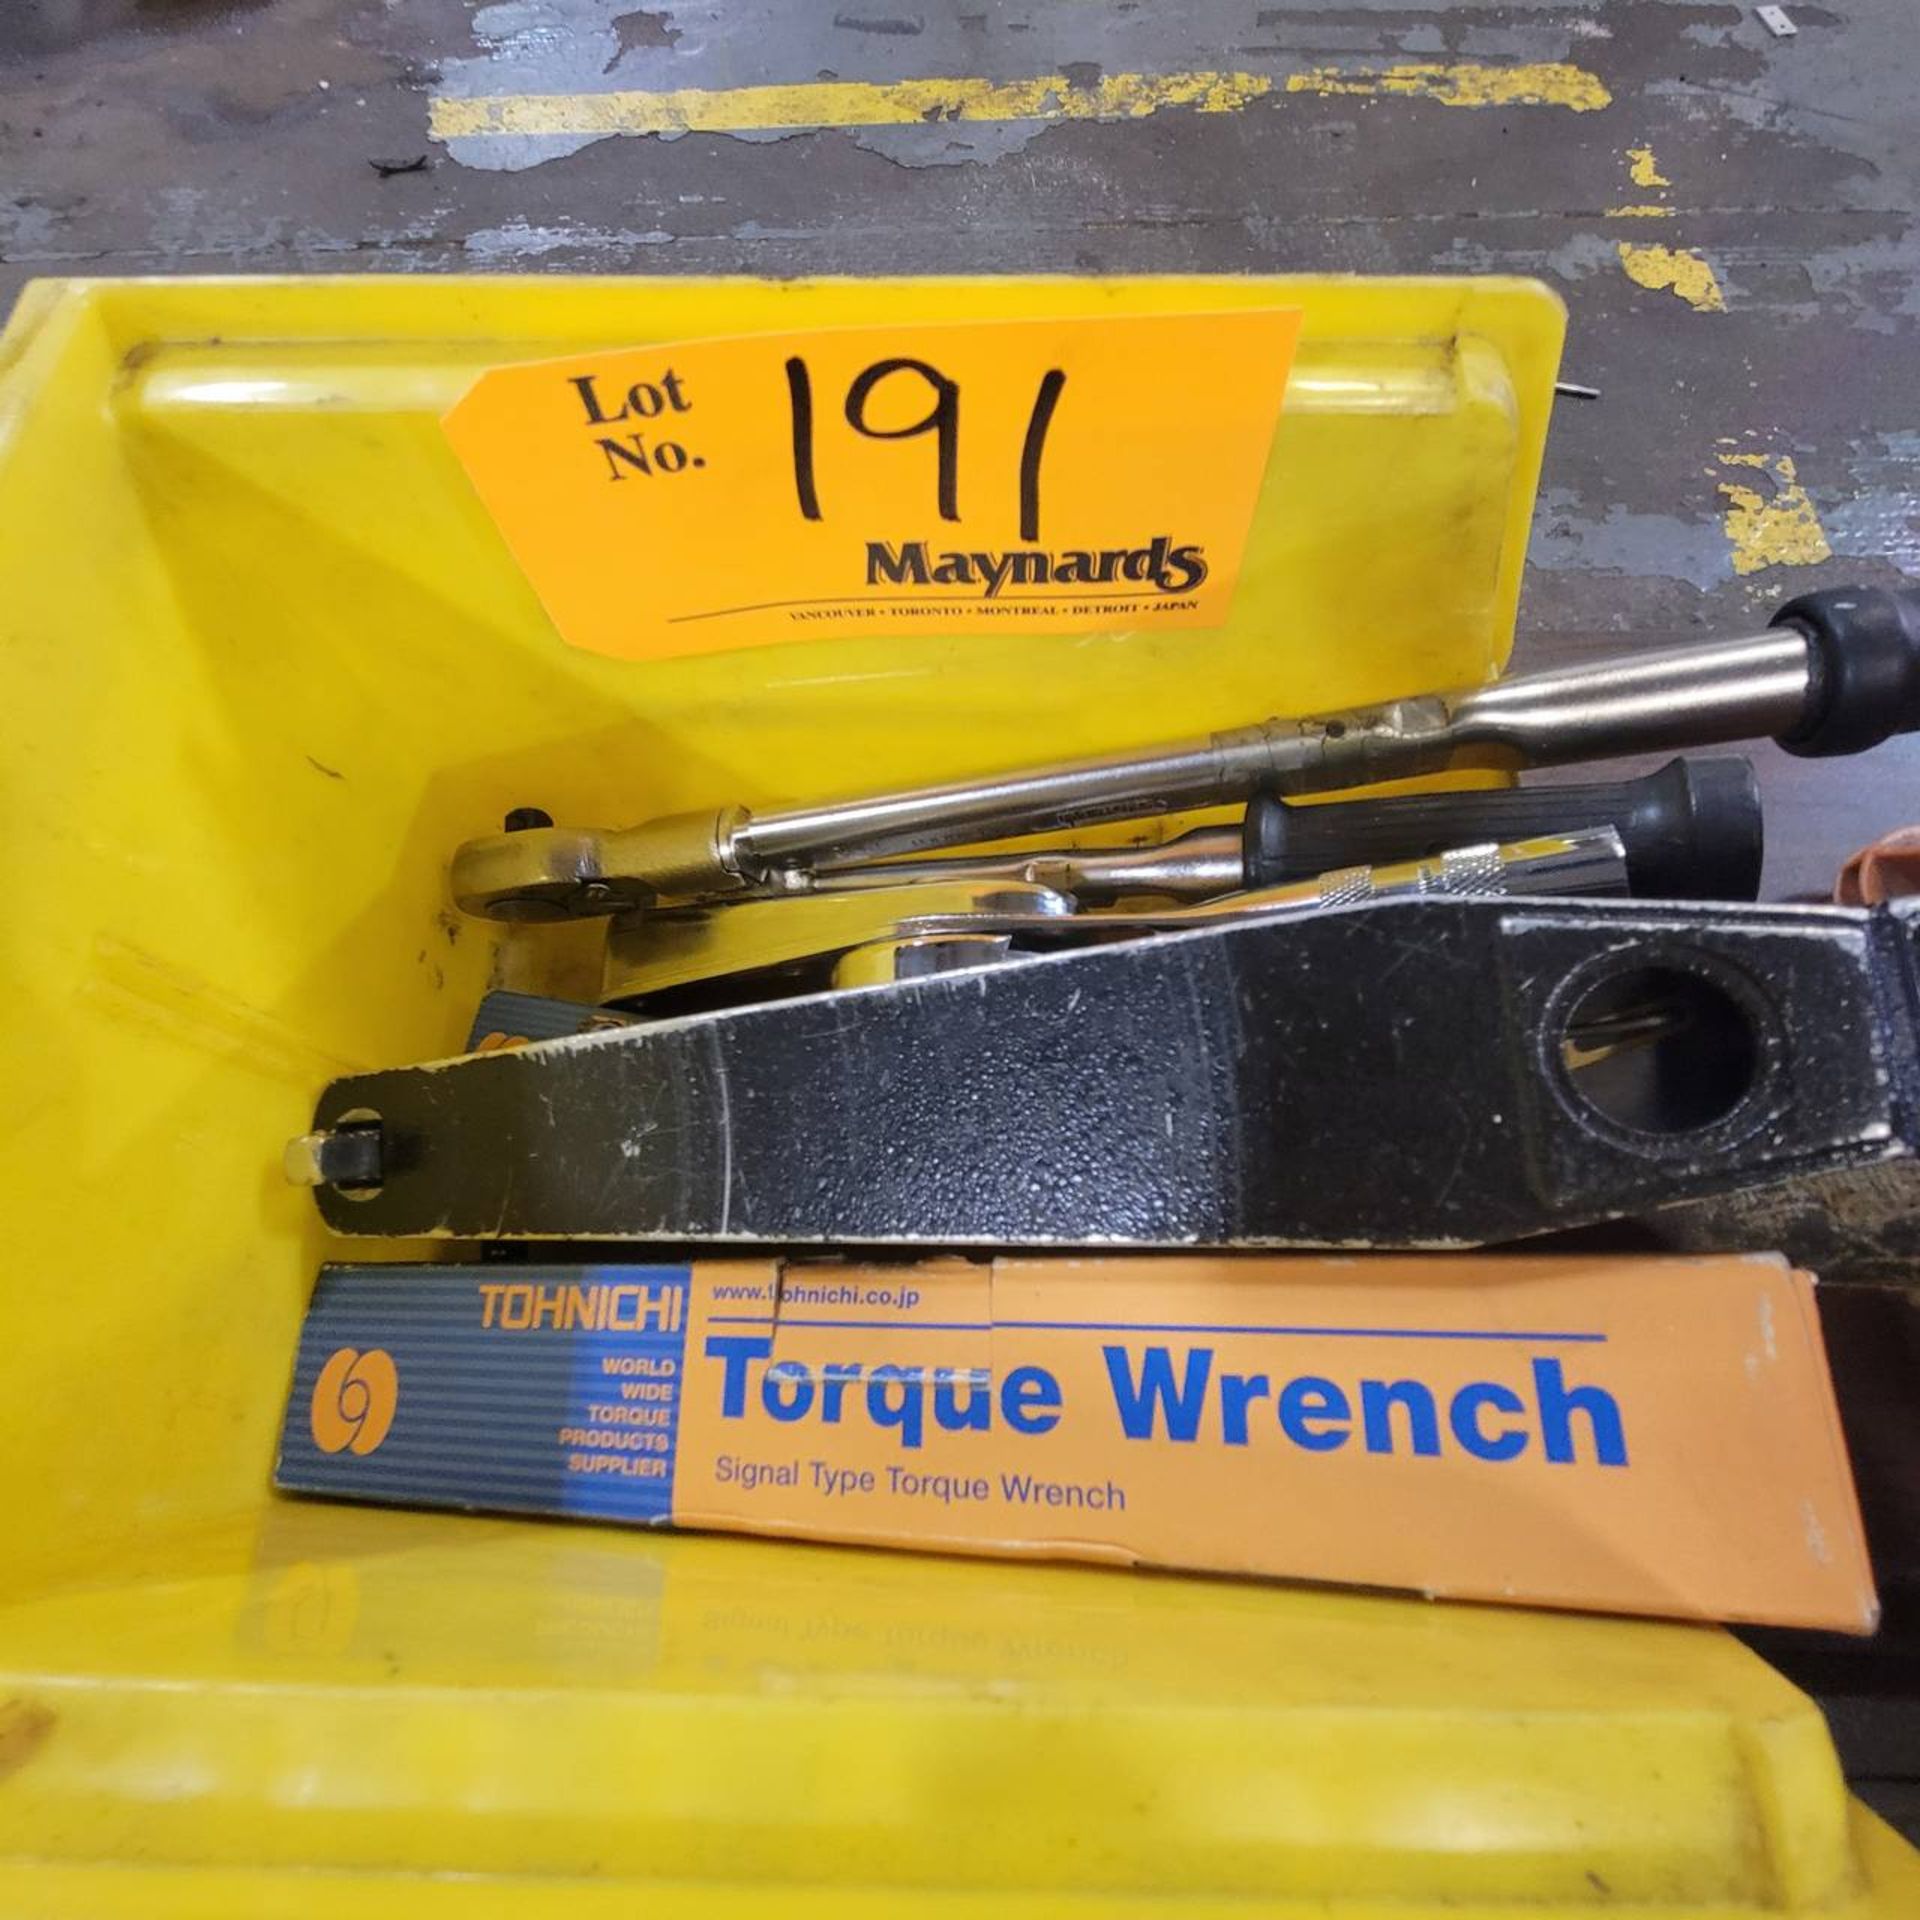 Assorted 3/8" torque wrenches